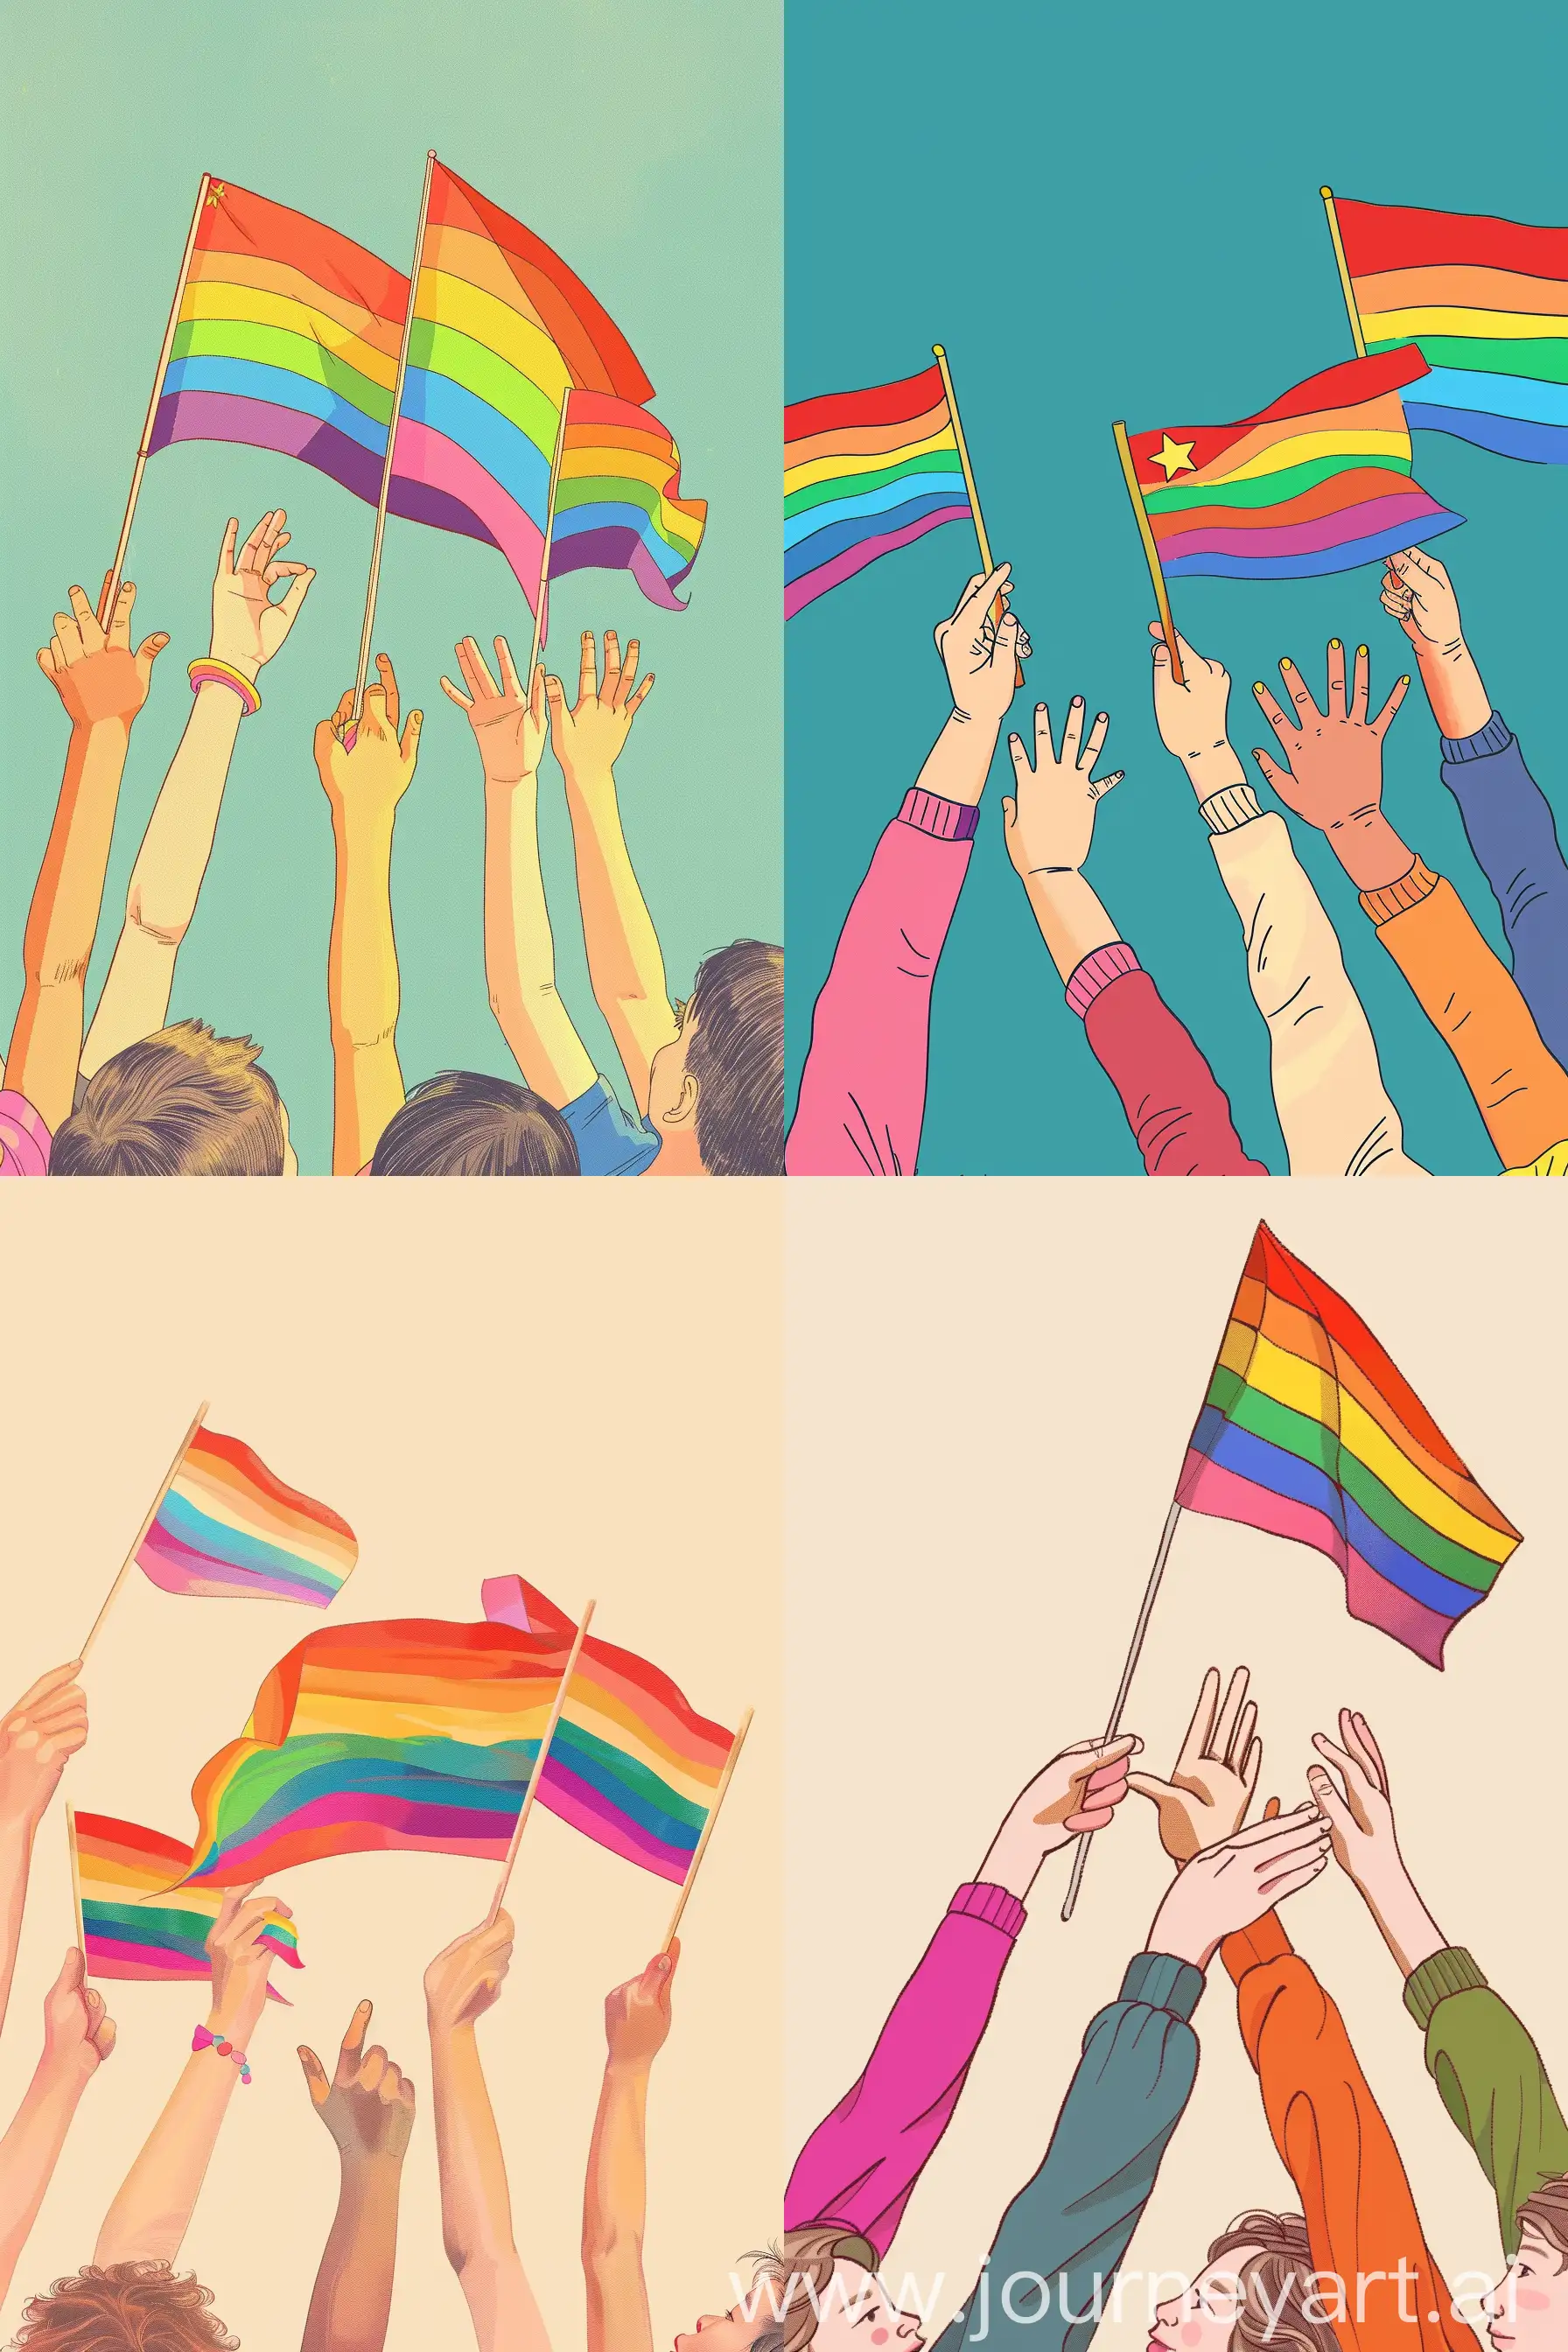 /imagine prompt: color photo of: a group of children's hands waving rainbow flags, in a minimalist and graphic illustration style. The hands are varied in size and skin tone, creating a diverse representation. The rainbow flags are vibrant and dynamic, with bold, clean lines. The composition is simple yet impactful, focusing on the unity and joy of the children's gestures. The background is a solid color, providing a clean and uncluttered canvas for the illustration. The overall aesthetic is contemporary and visually striking, capturing the essence of the "Queer Families in China" media account. —c 10 —ar 2:3